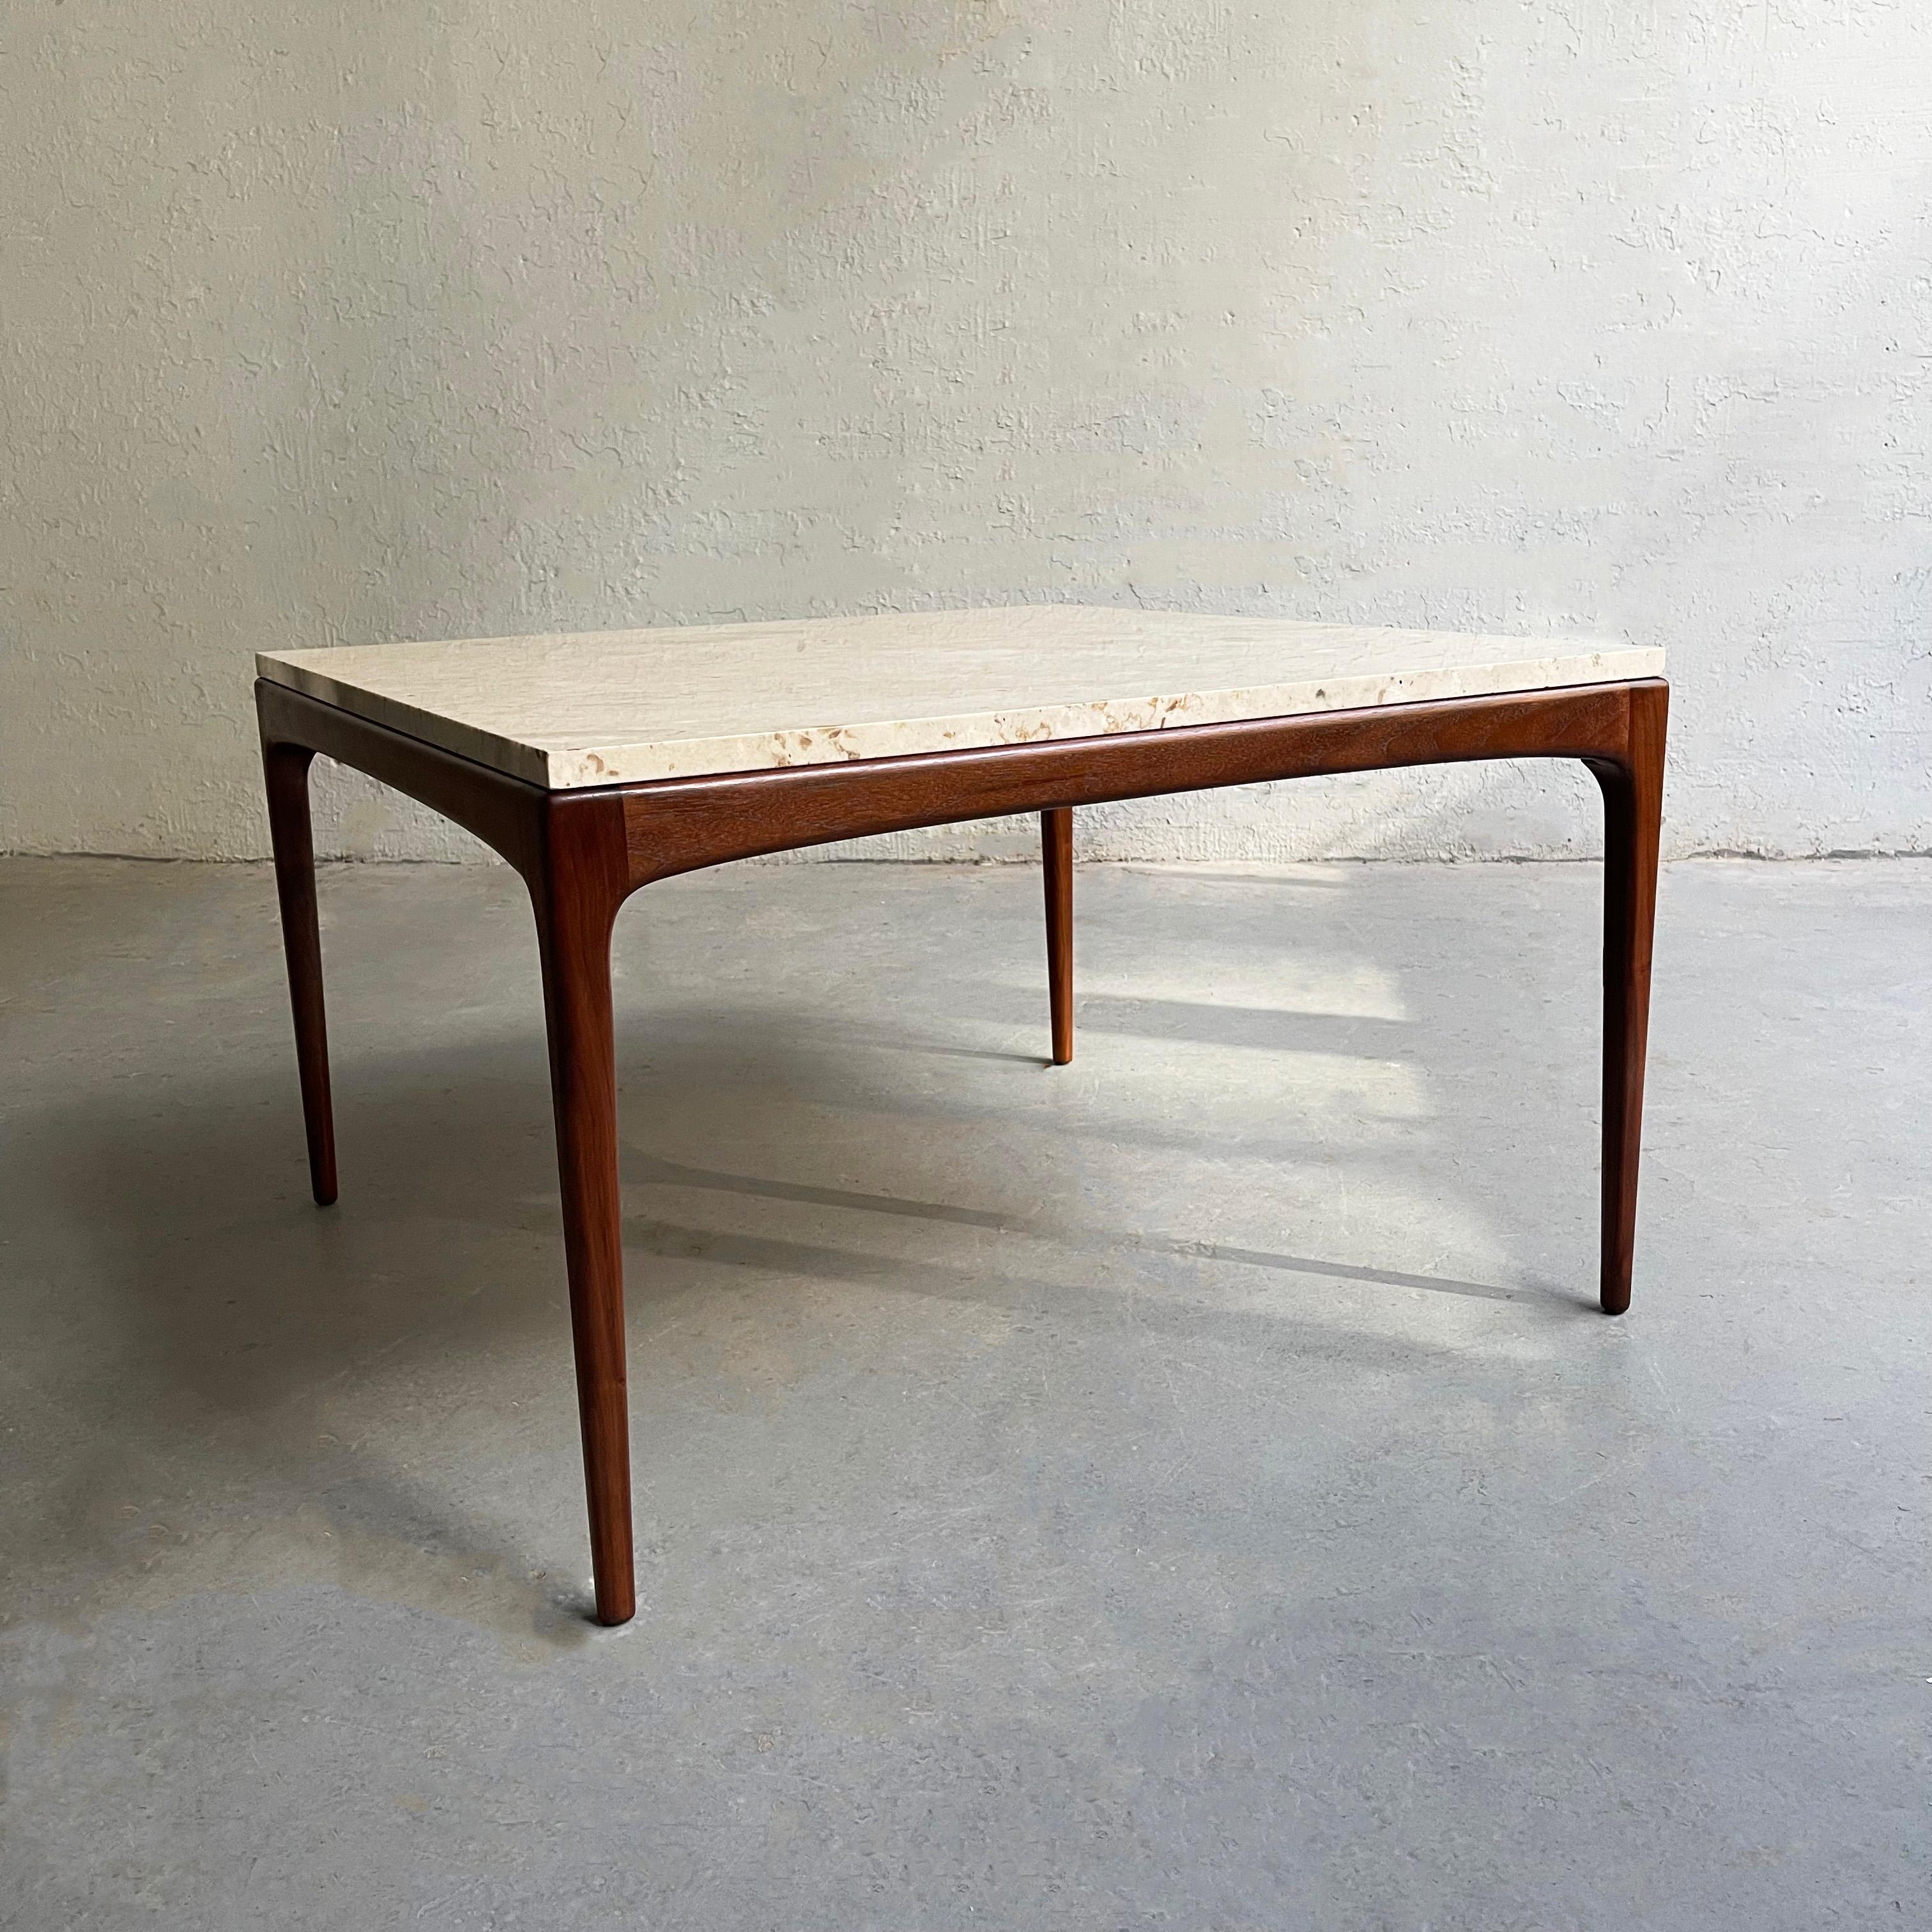 Danish modern coffee table features a square, beige marble top that rests on a slender teak frame with tapered legs.